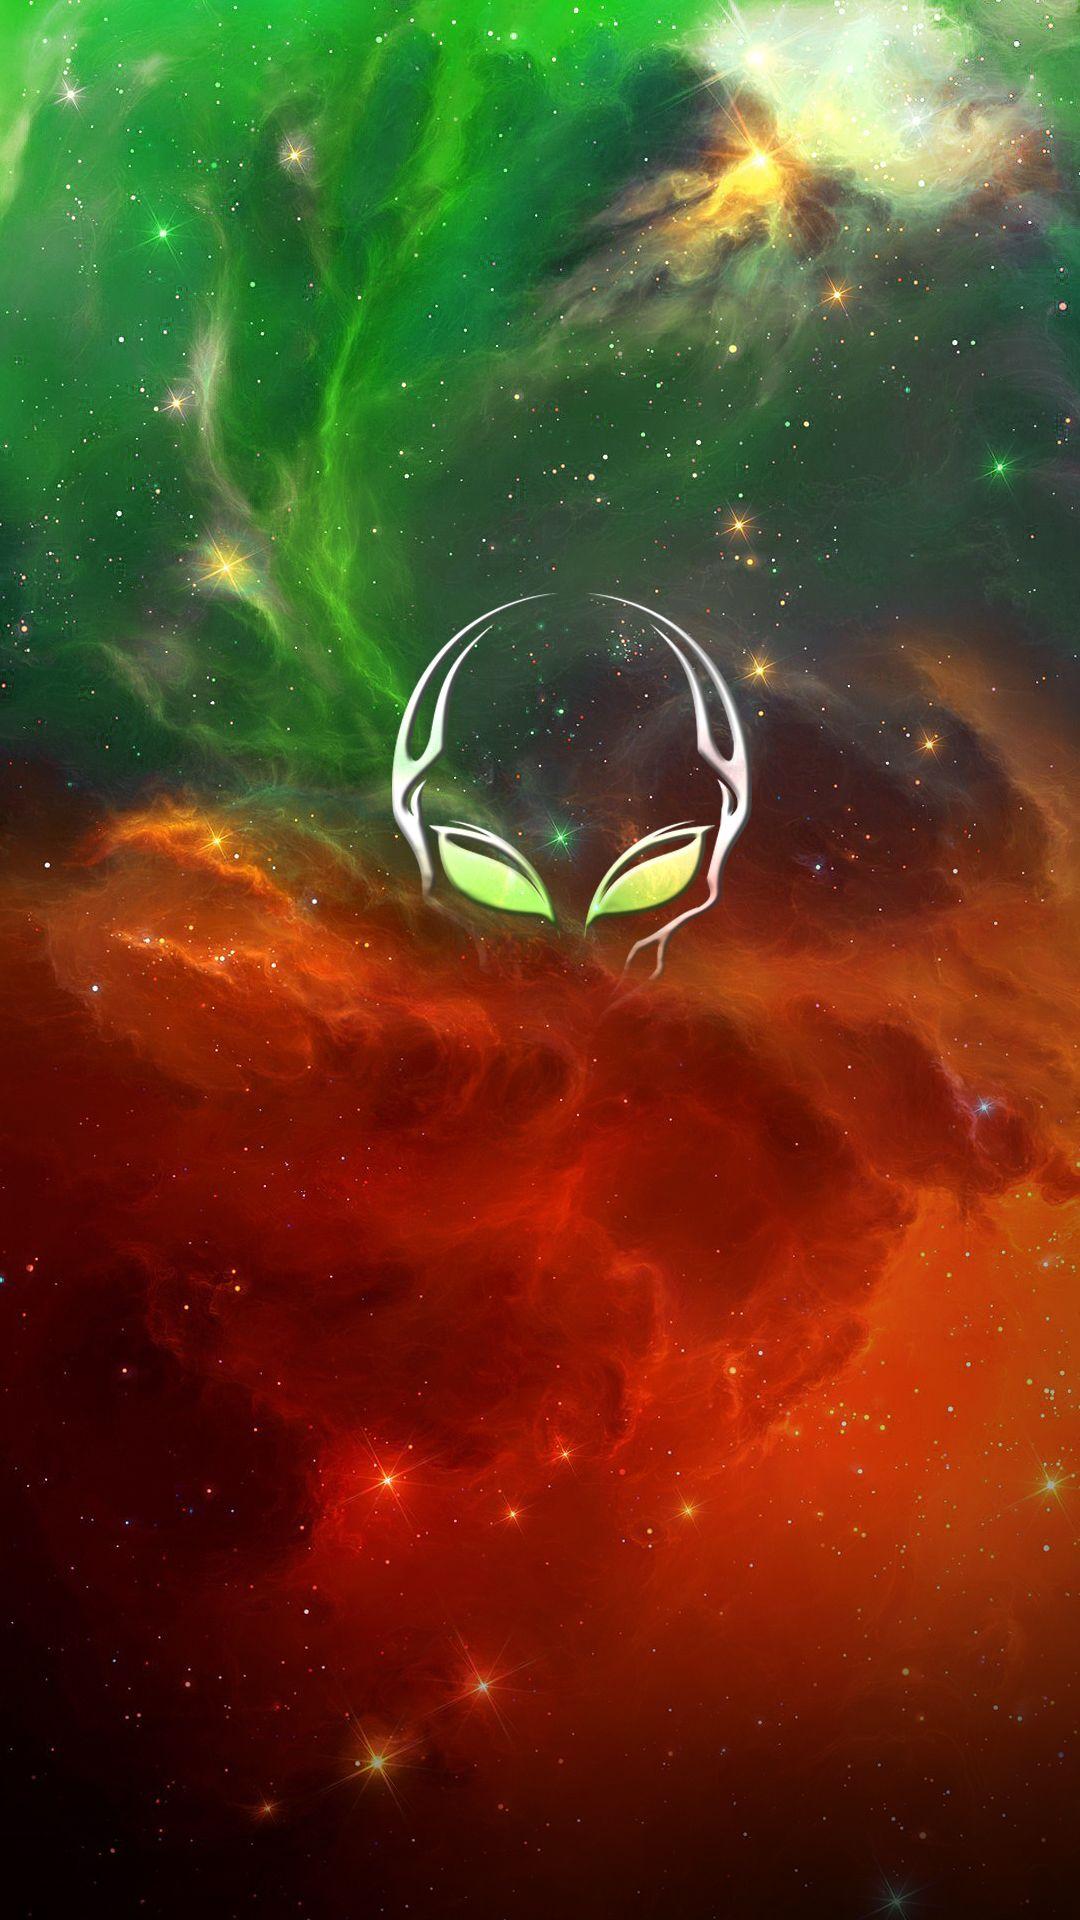 Free Alien Gear wallpaper for your computer or phone